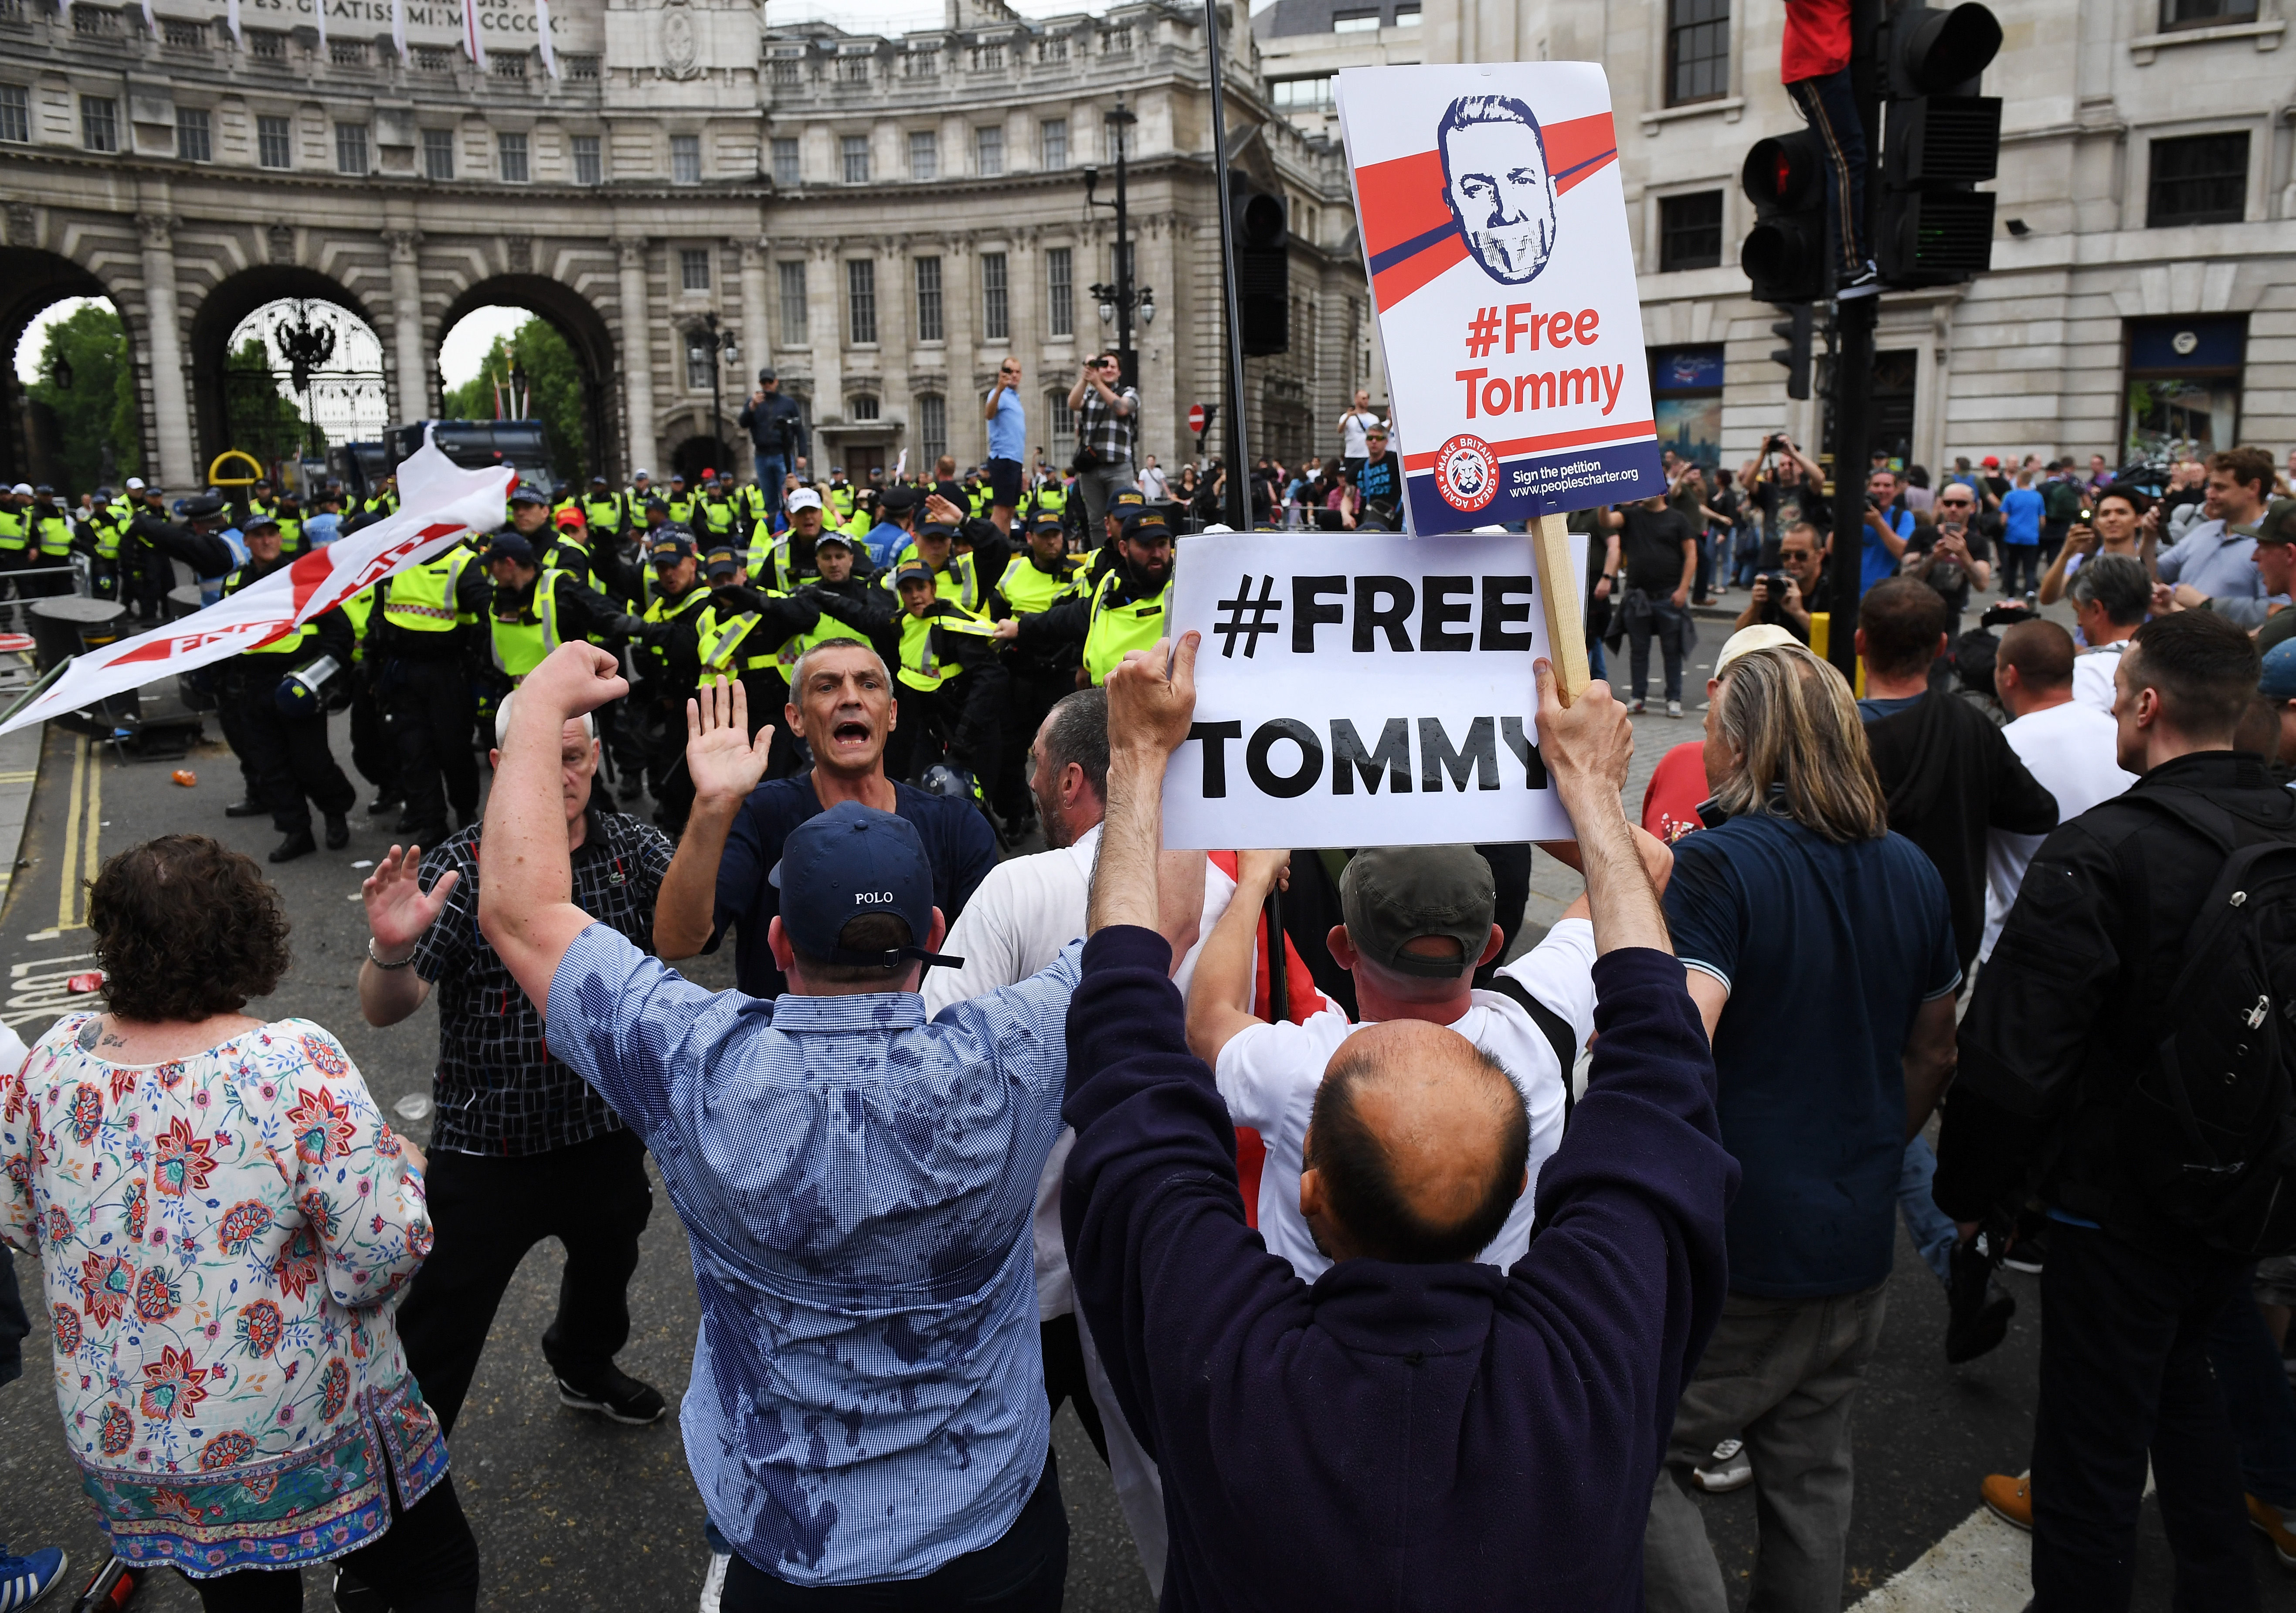 LONDON, ENGLAND - JUNE 09: Demonstrators clash with police during a 'Free Tommy Robinson' protest on Whitehall on June 9, 2018 in London, England. Protesters are calling for the release of English Defense League (EDL) leader Tommy Robinson who is serving 13 months in prison for contempt of court. (Photo by Chris J Ratcliffe/Getty Images)